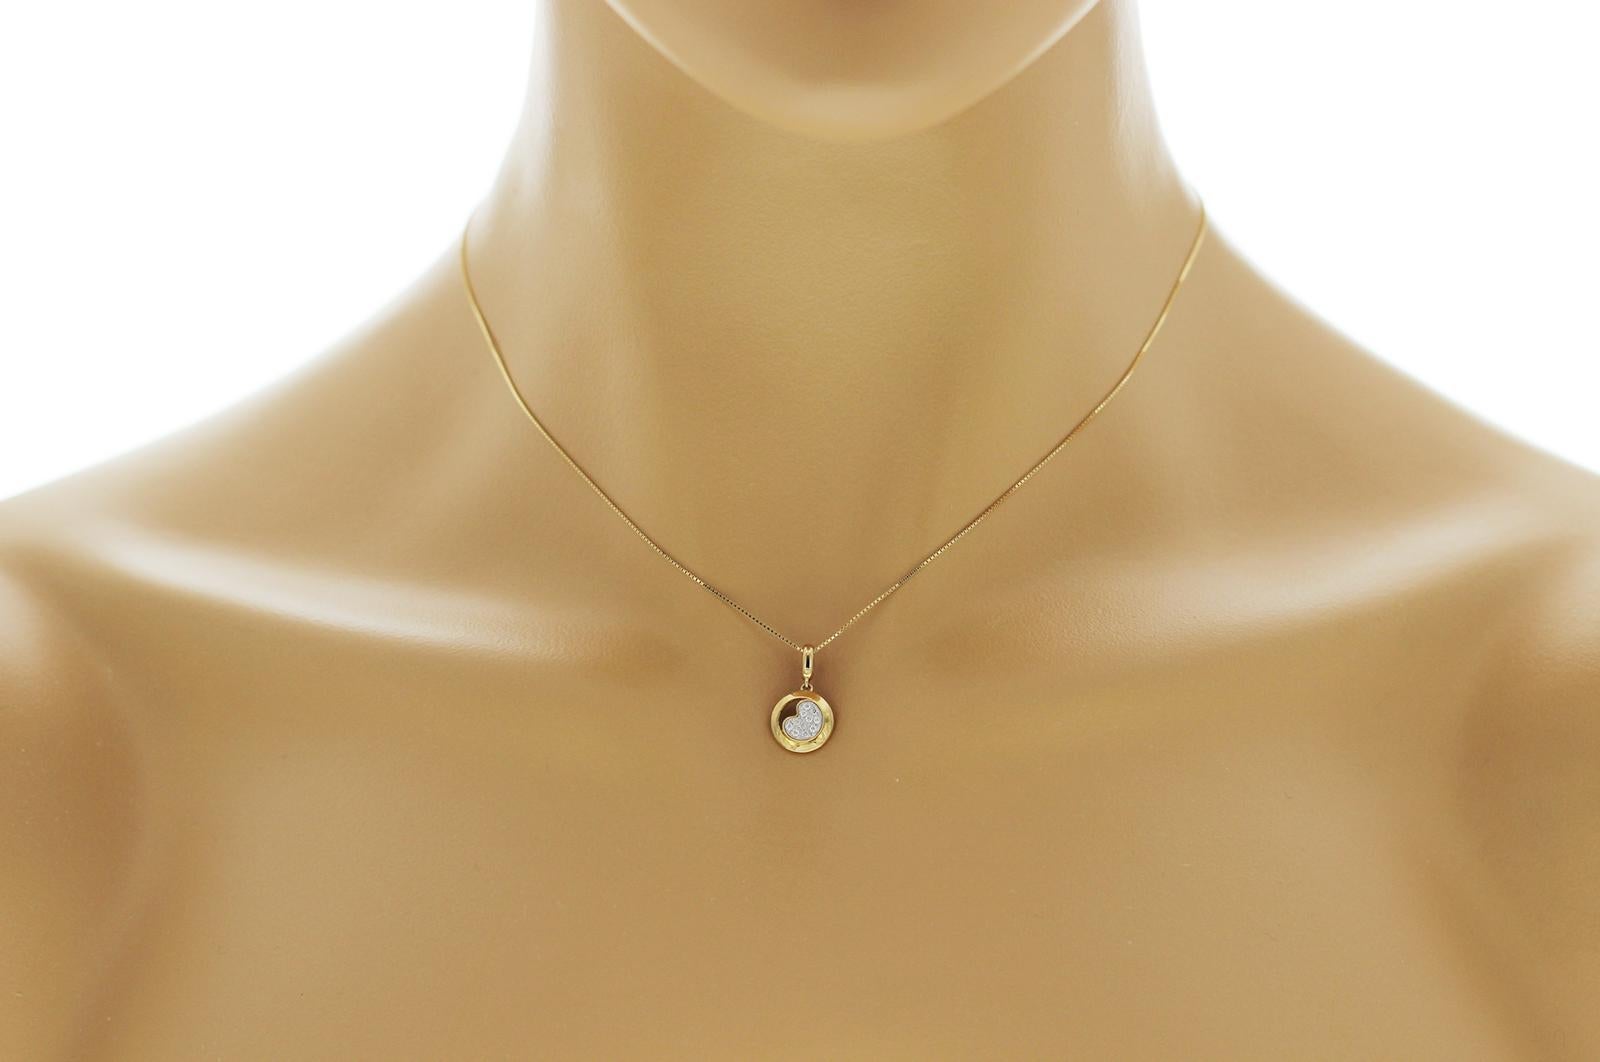 100% Authentic, 100% Customer Satisfaction

Pendant: 15 mm

Chain: 0.5 mm

Size: 16 Inches

Metal: 18K Yellow Gold

Hallmarks: 18K

Total Weight: 2.6 Grams

Stone Type: 0.06CT Diamonds G-H   V-SI

Condition: New

Estimated Price: $1350

Stock